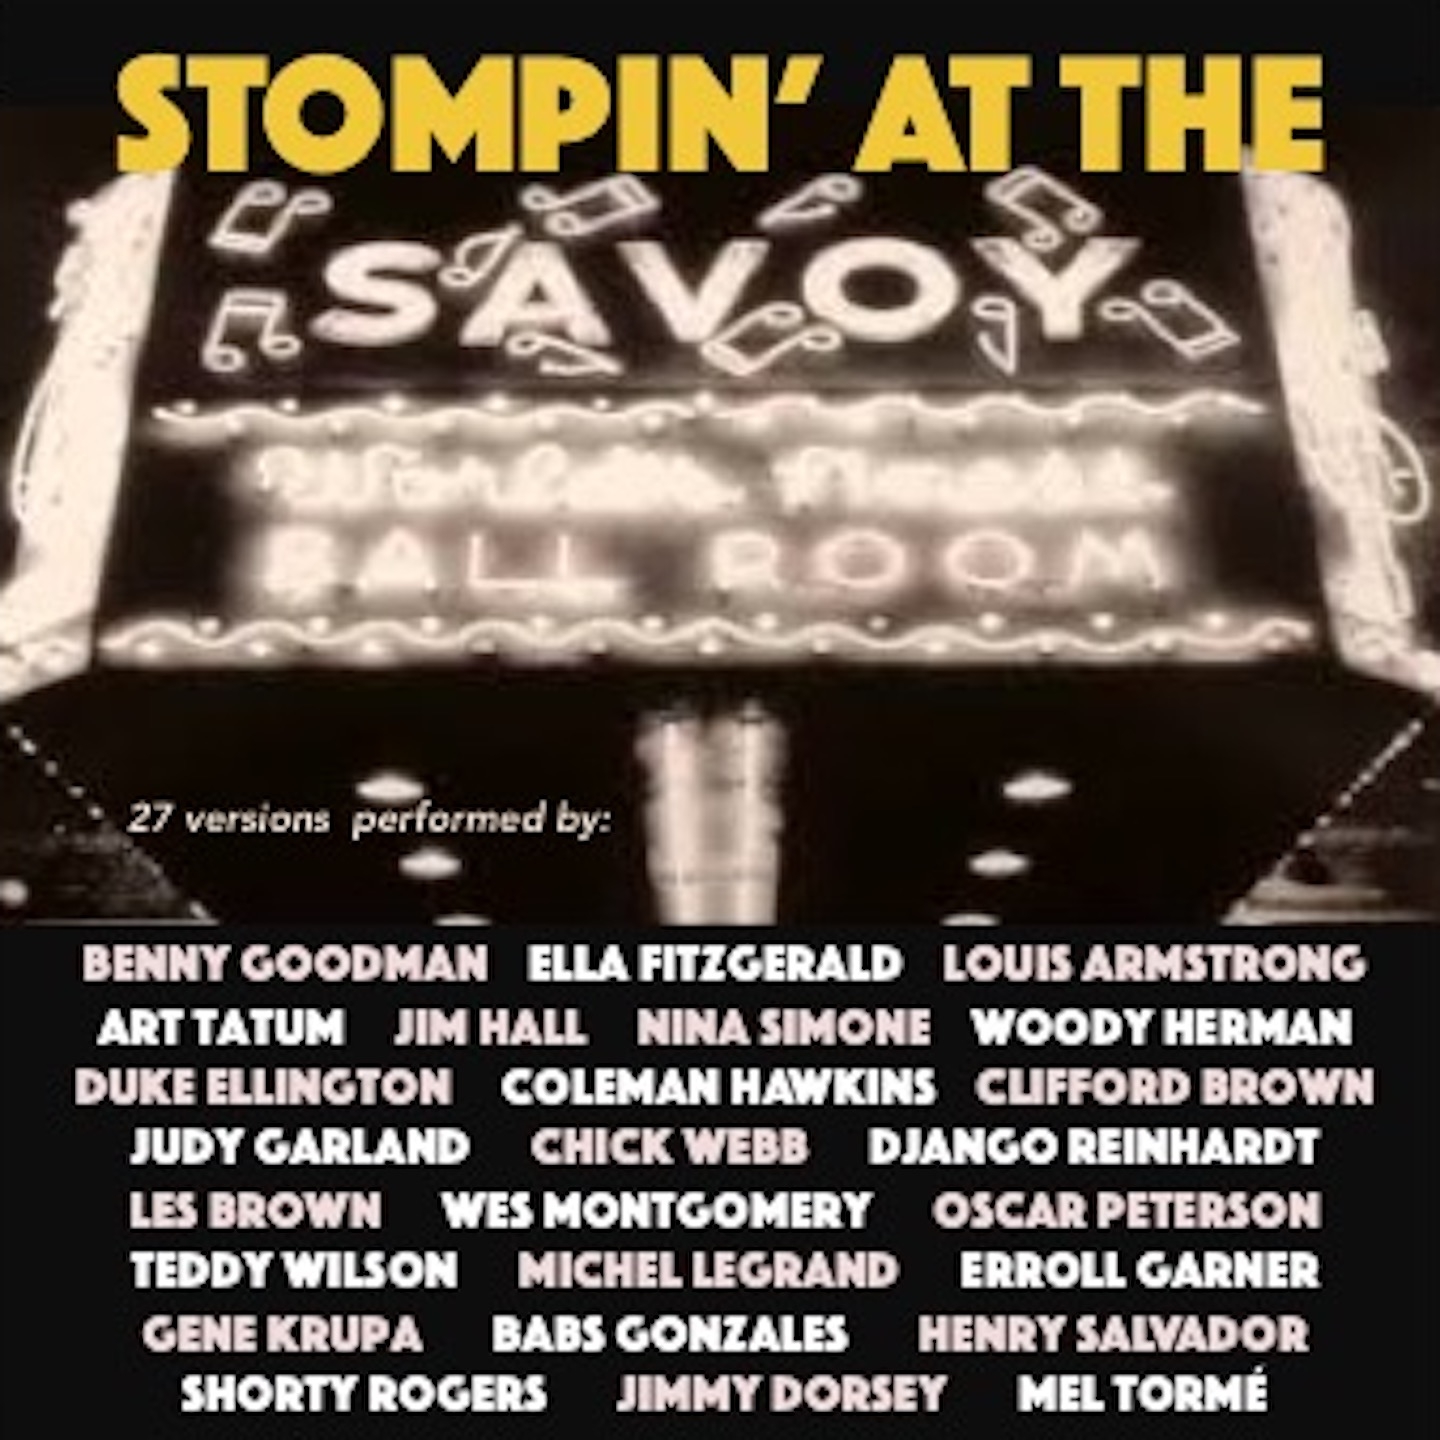 Stompin' At The Savoy (Chicago 1957)